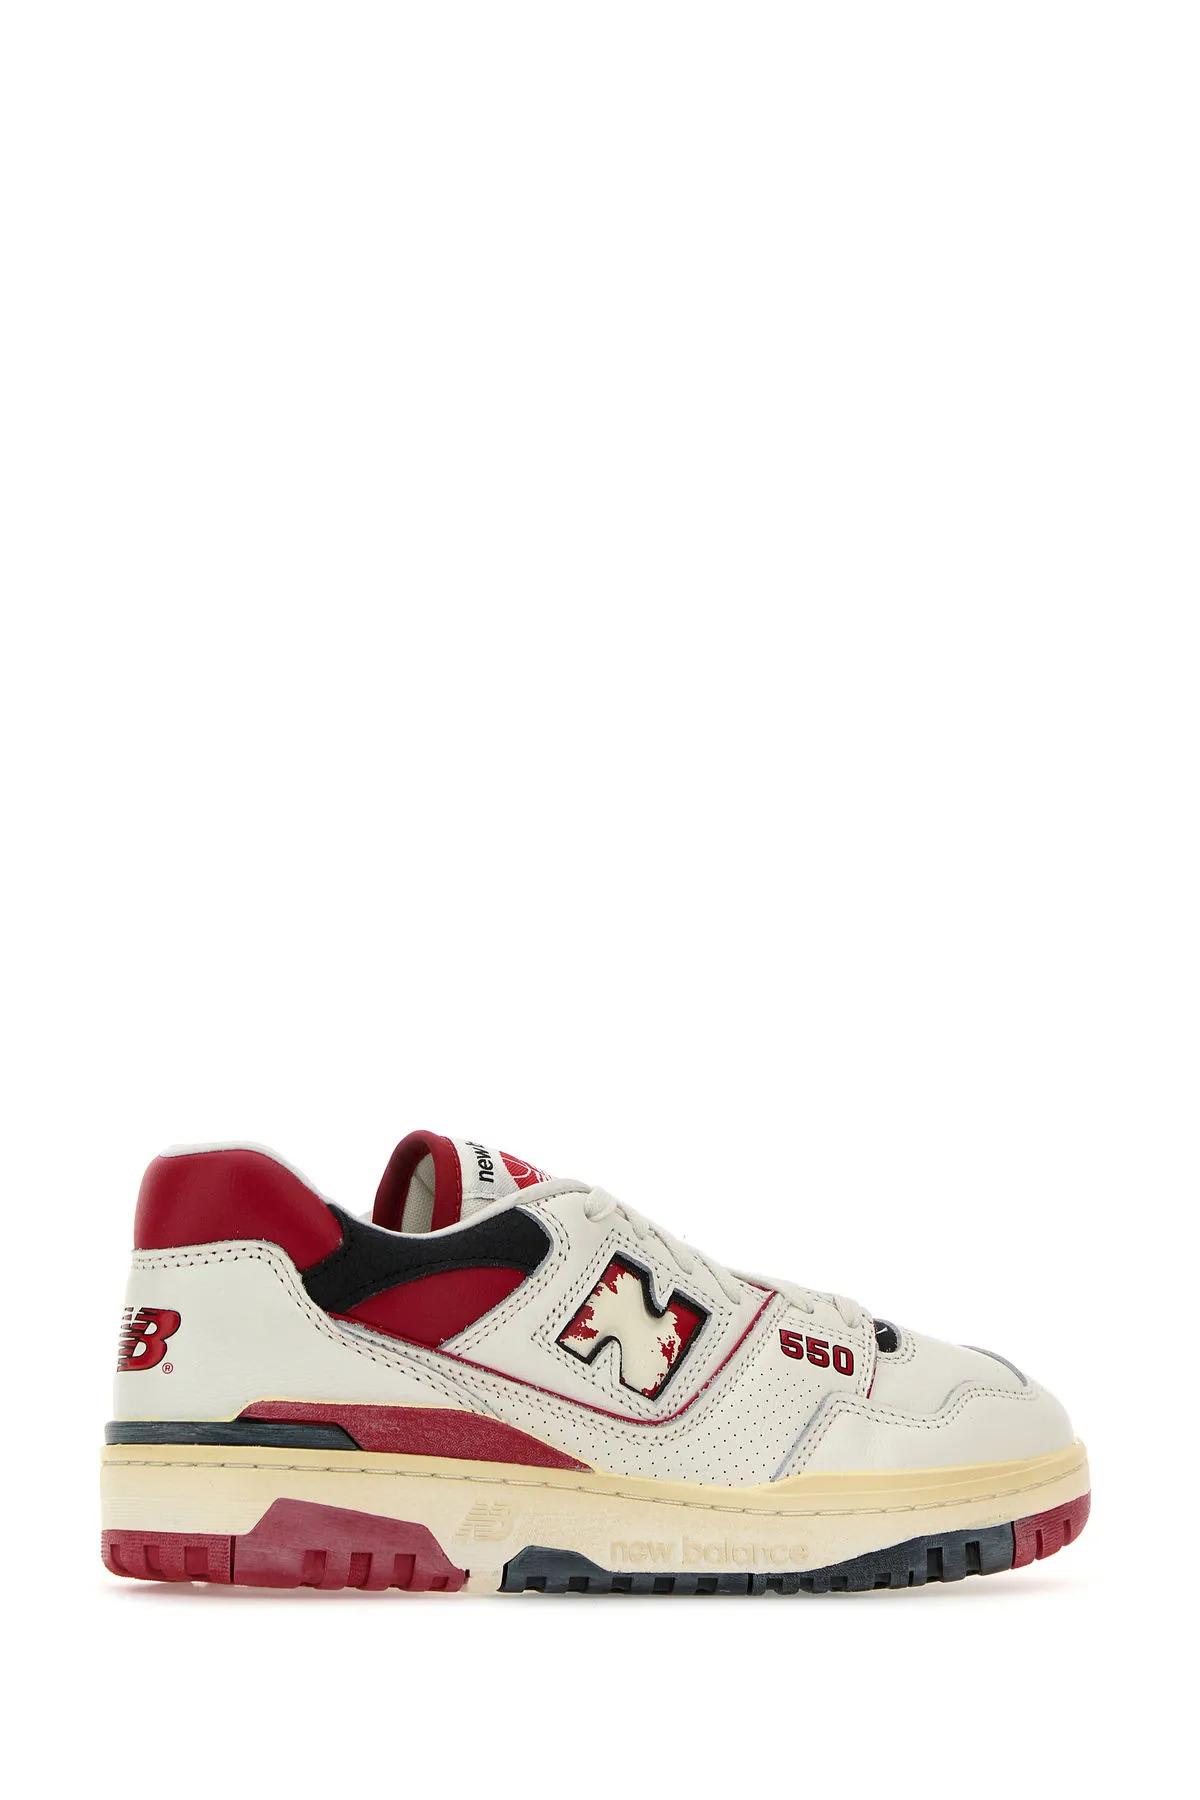 Shop New Balance Multicolor Leather 550 Sneakers In Red